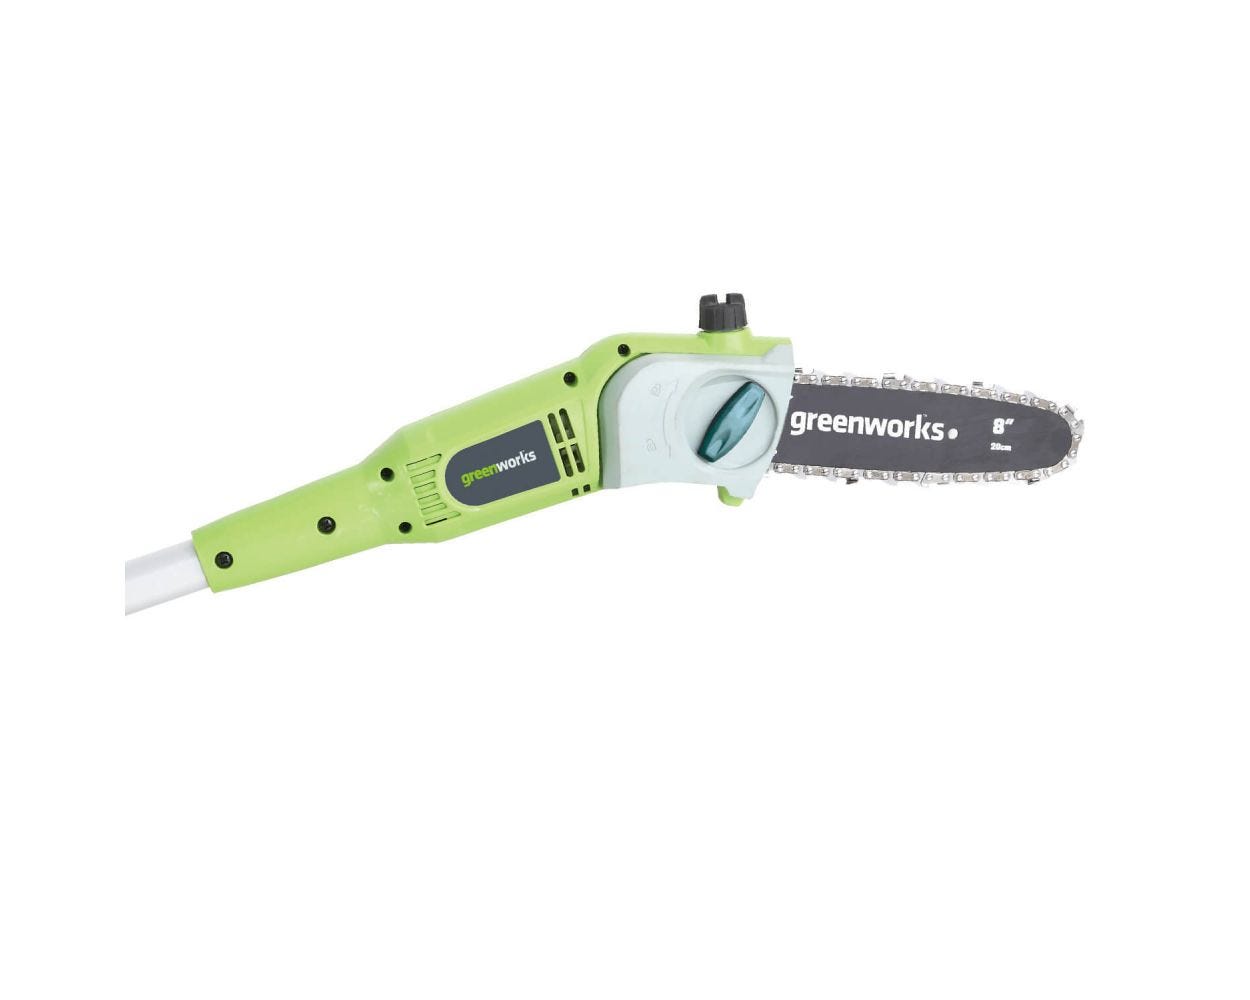 6.5 Amp Corded 8 inch Pole Saw